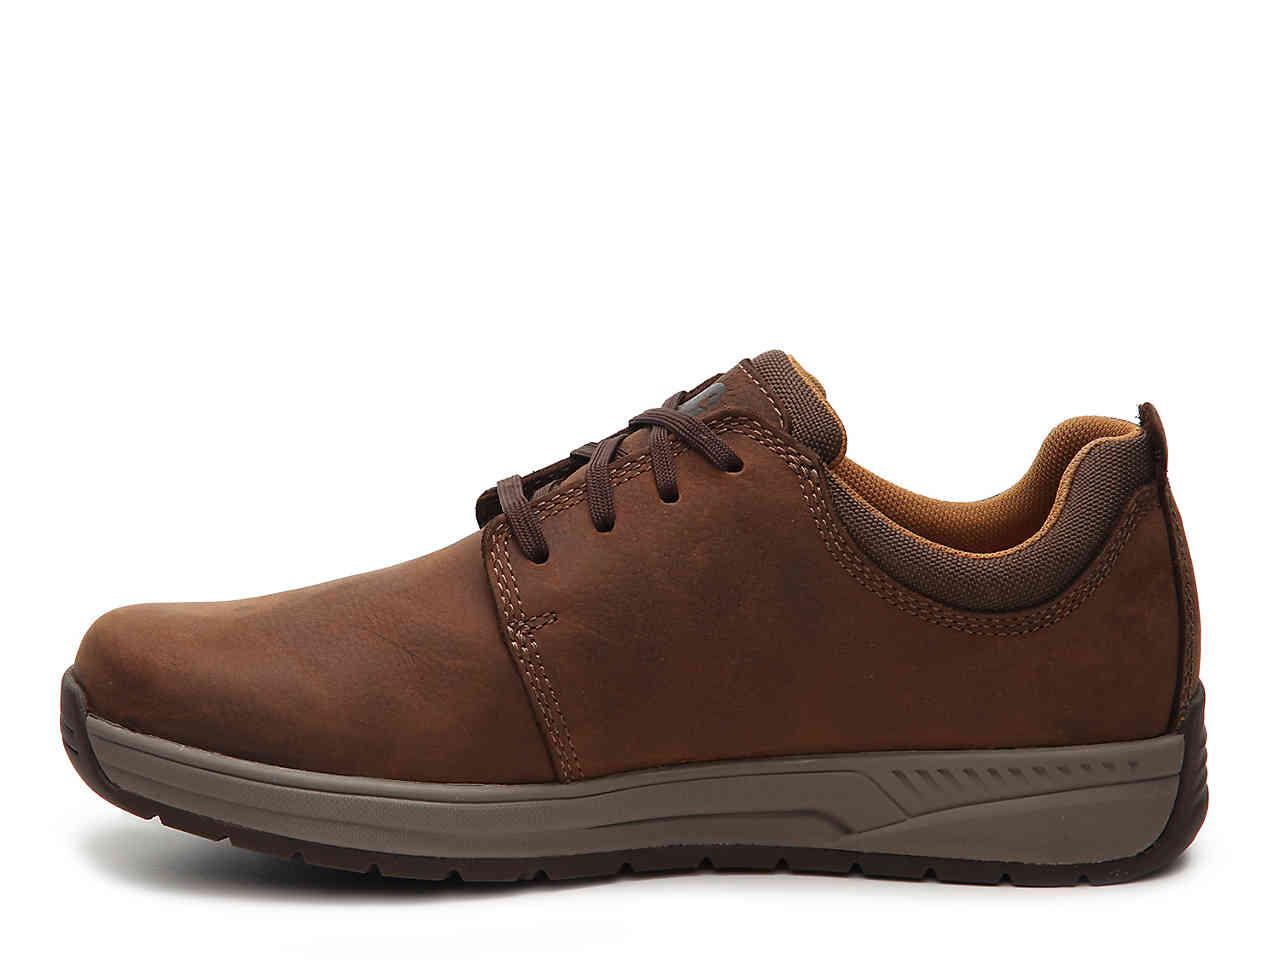 Carhartt Leather Oxford Work Shoe in Brown for Men - Lyst